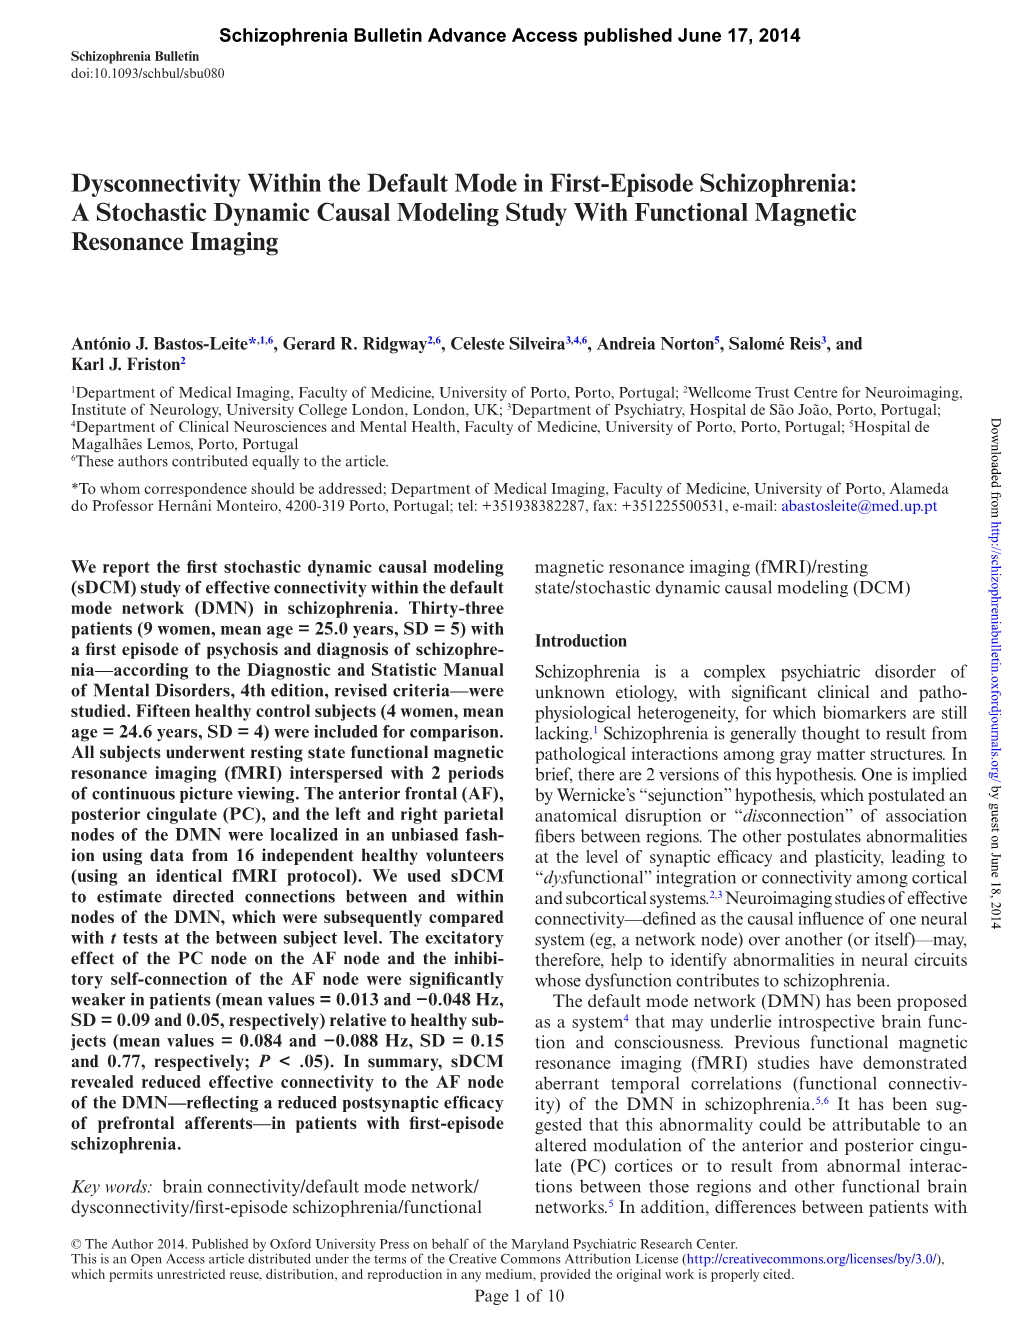 Dysconnectivity Within the Default Mode in First-Episode Schizophrenia: a Stochastic Dynamic Causal Modeling Study with Functional Magnetic Resonance Imaging